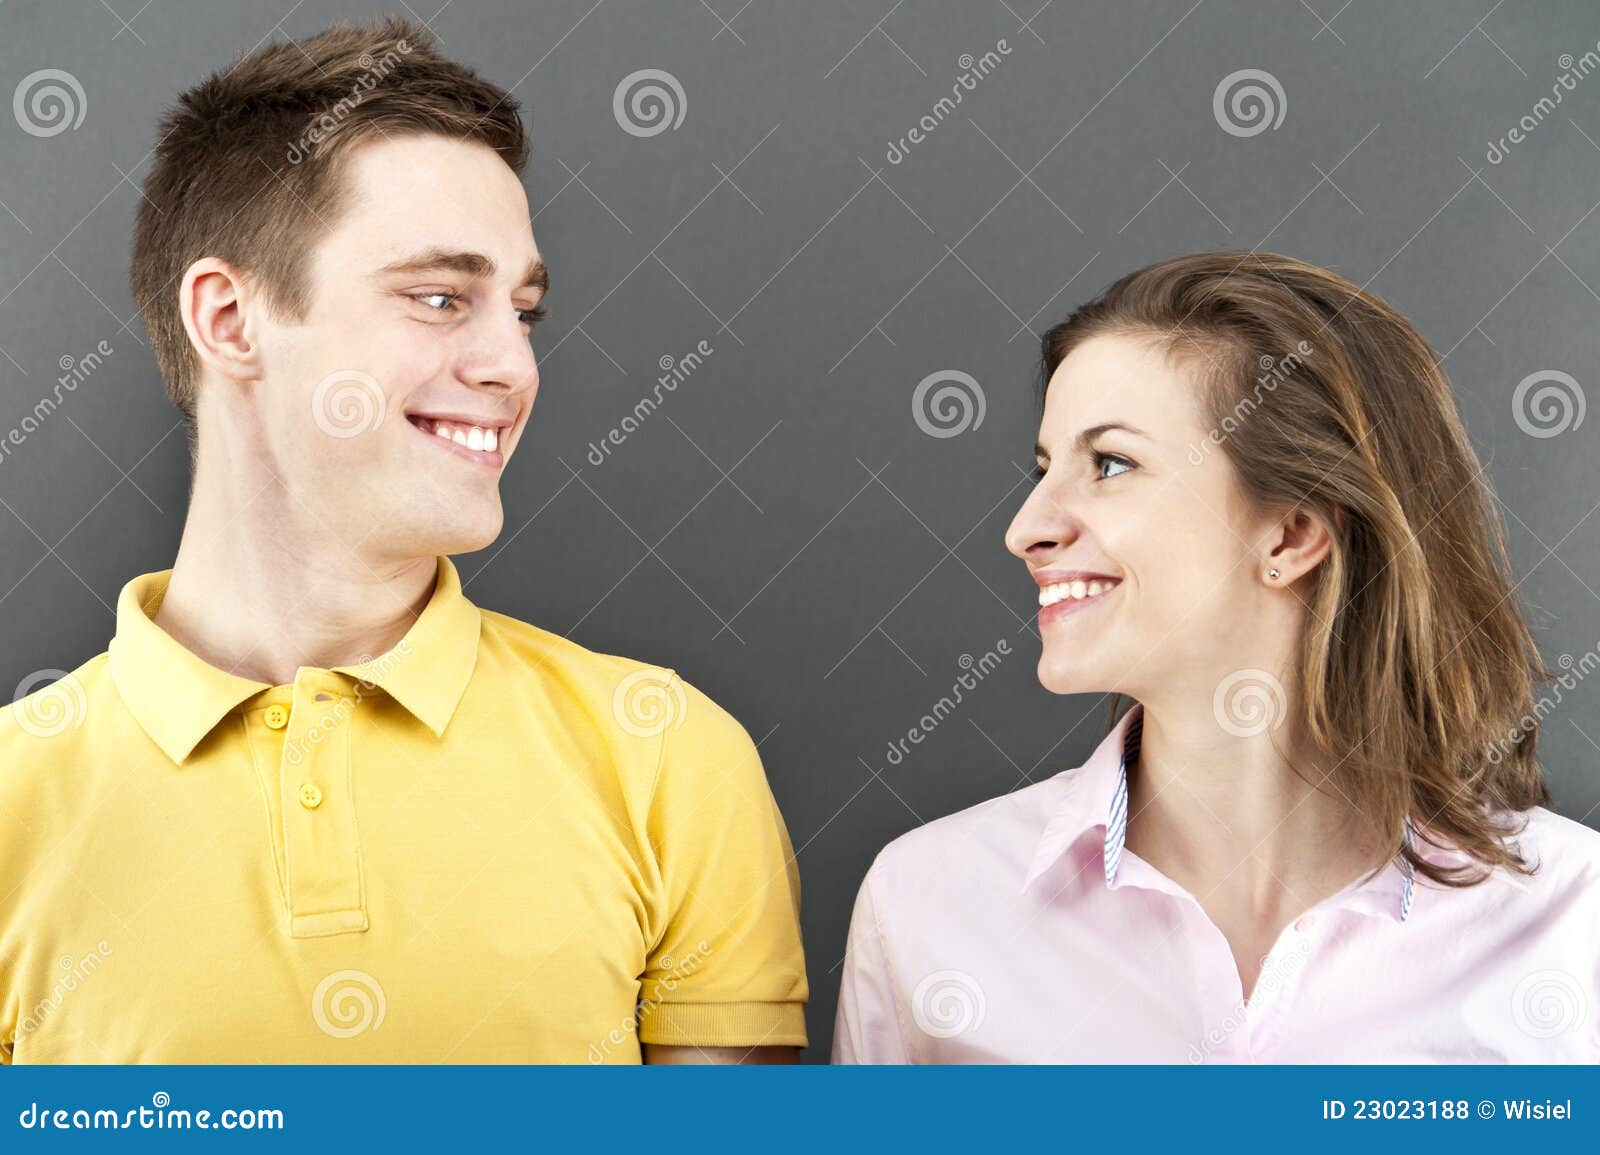 Woman And Man Together Royalty Free Stock Photos - Image: 23023188